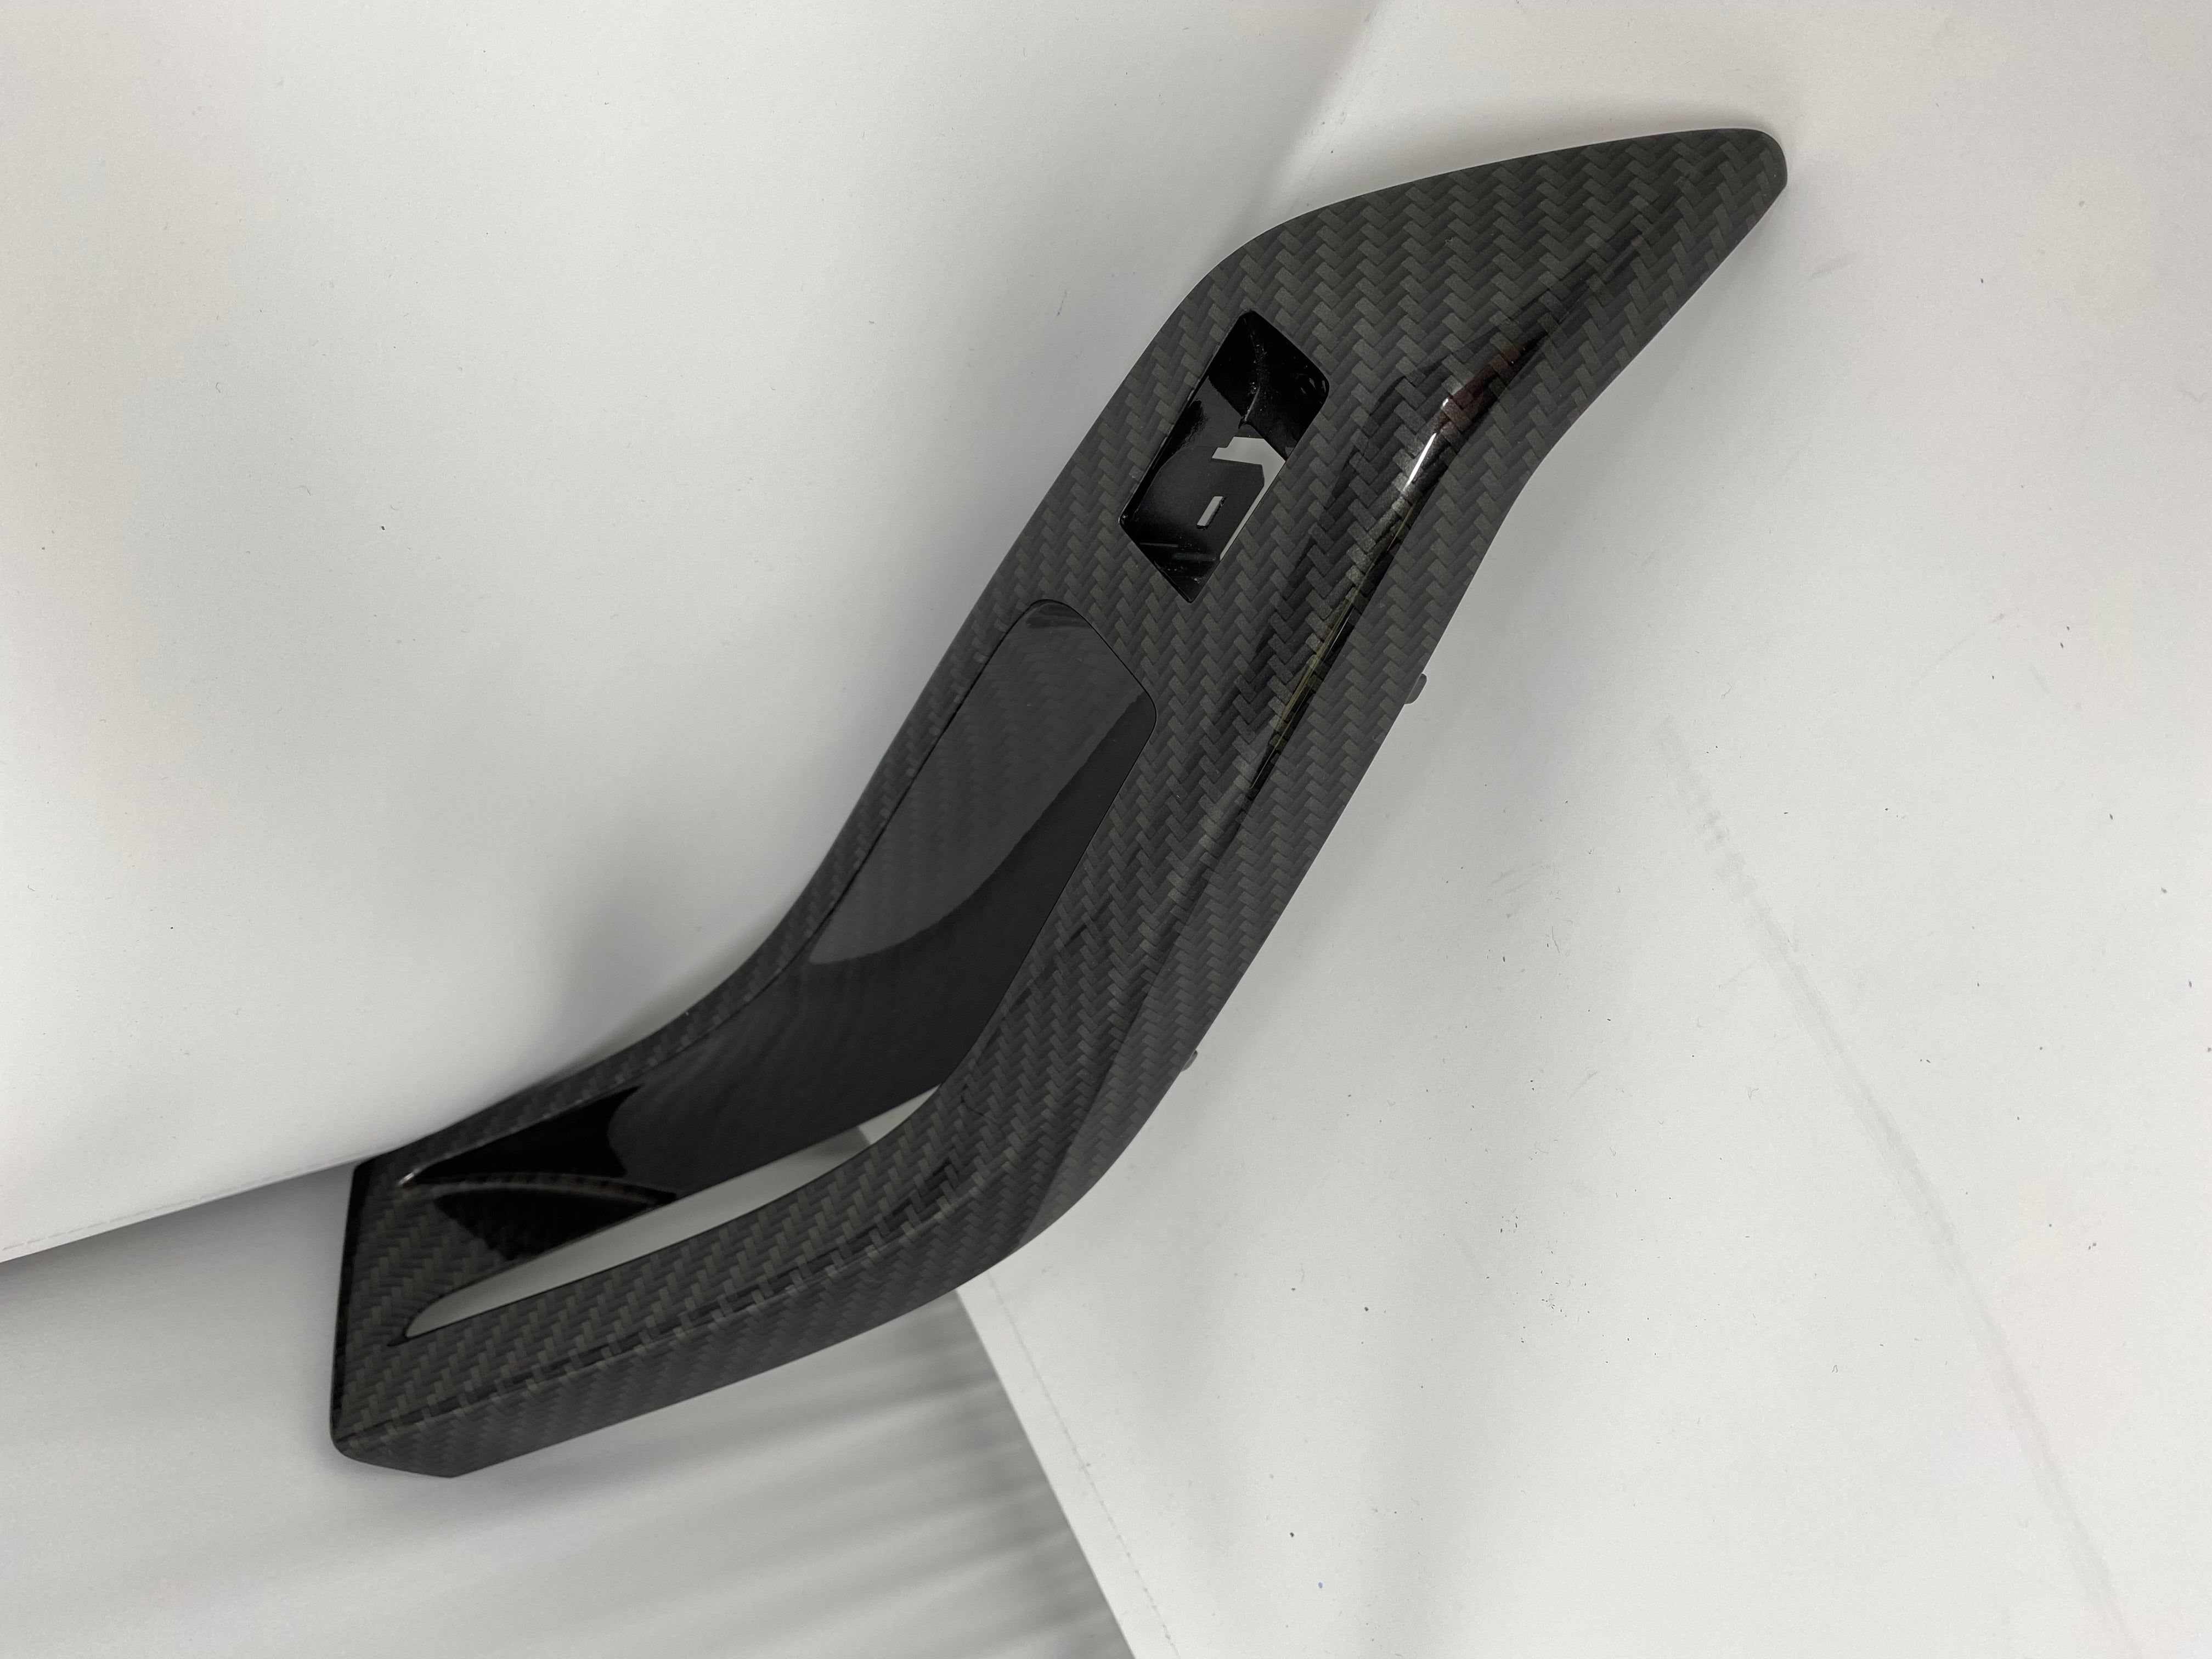 Genuine Ford Interior Door Handle Trims - Mk8/8.5 Fiesta (Painted/Hydrodipped Finishes)